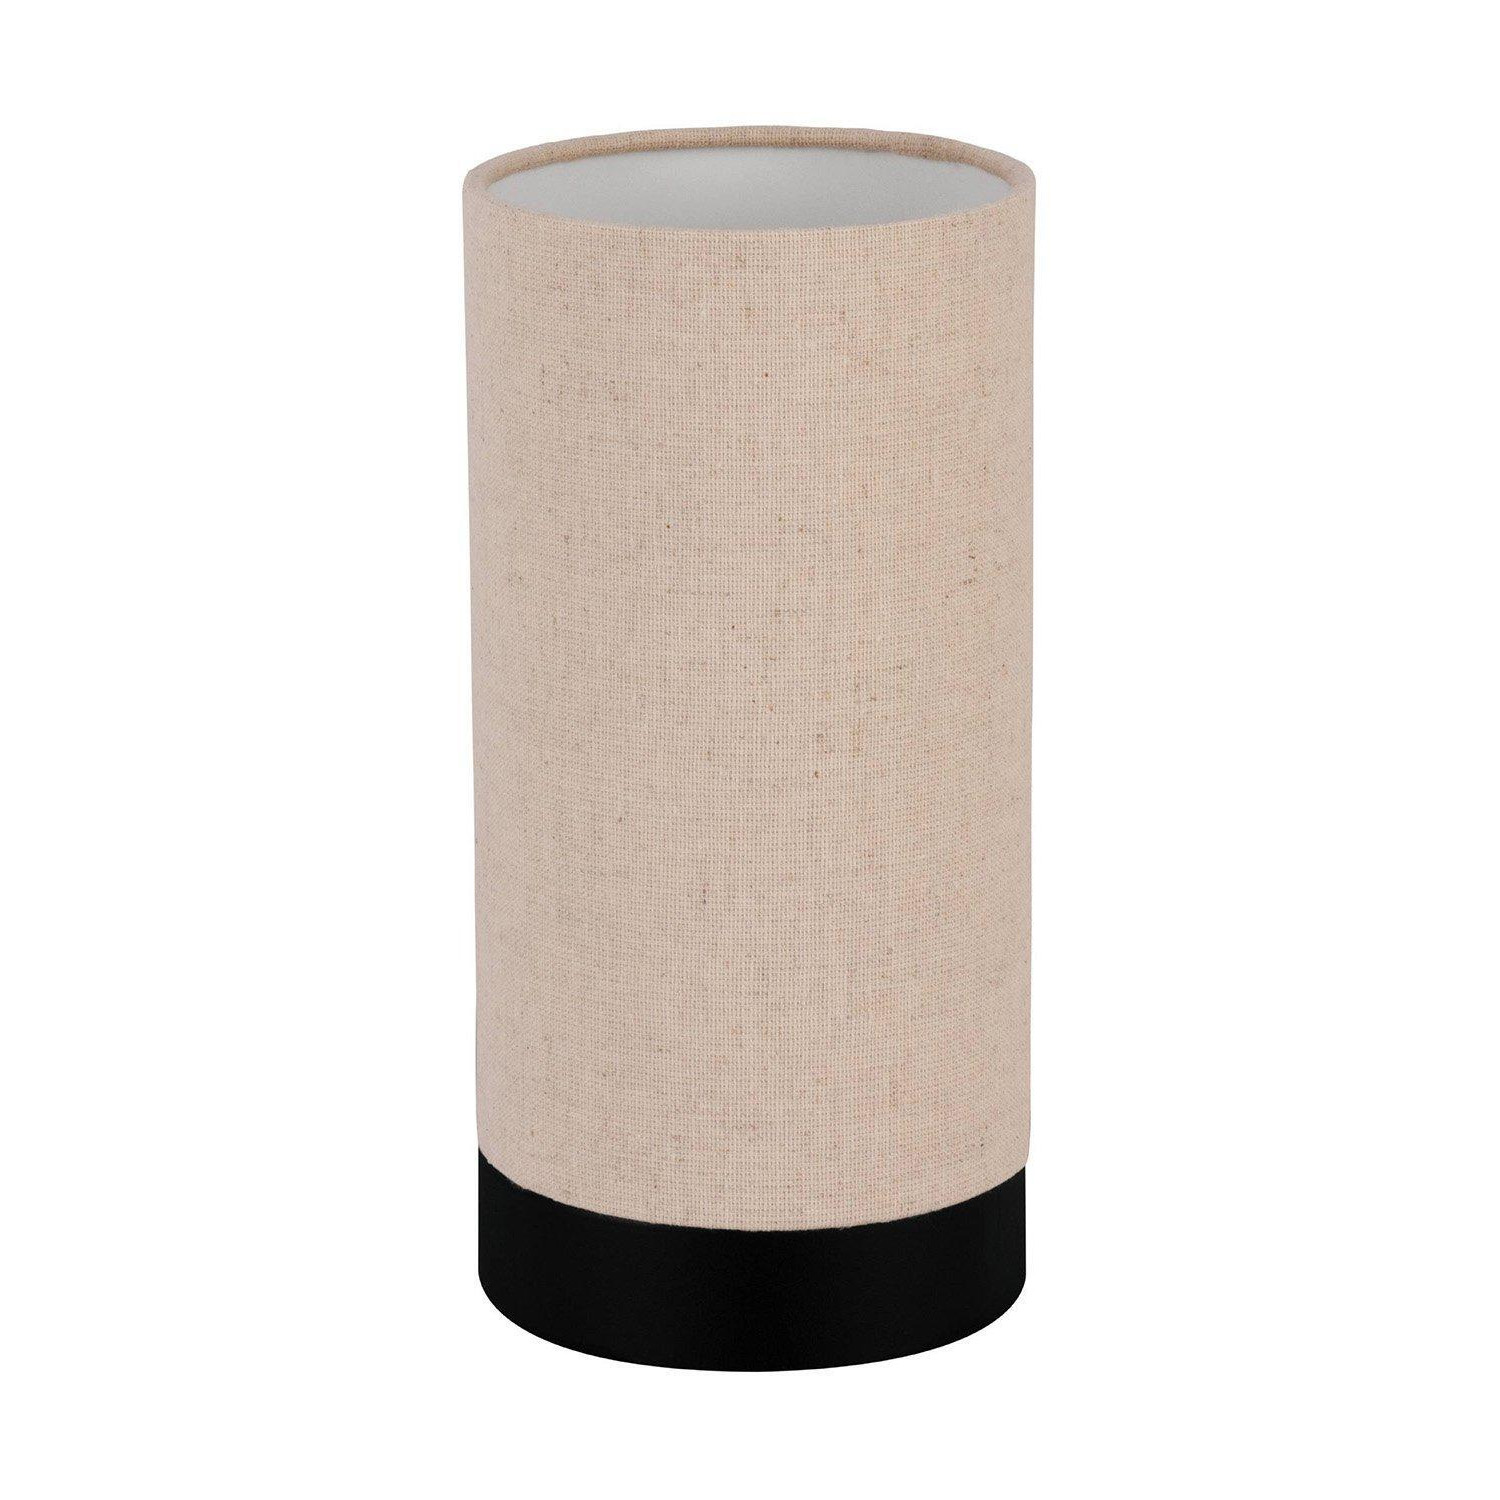 Feniglia Natural Linen Cylindrical Table Lamp - image 1